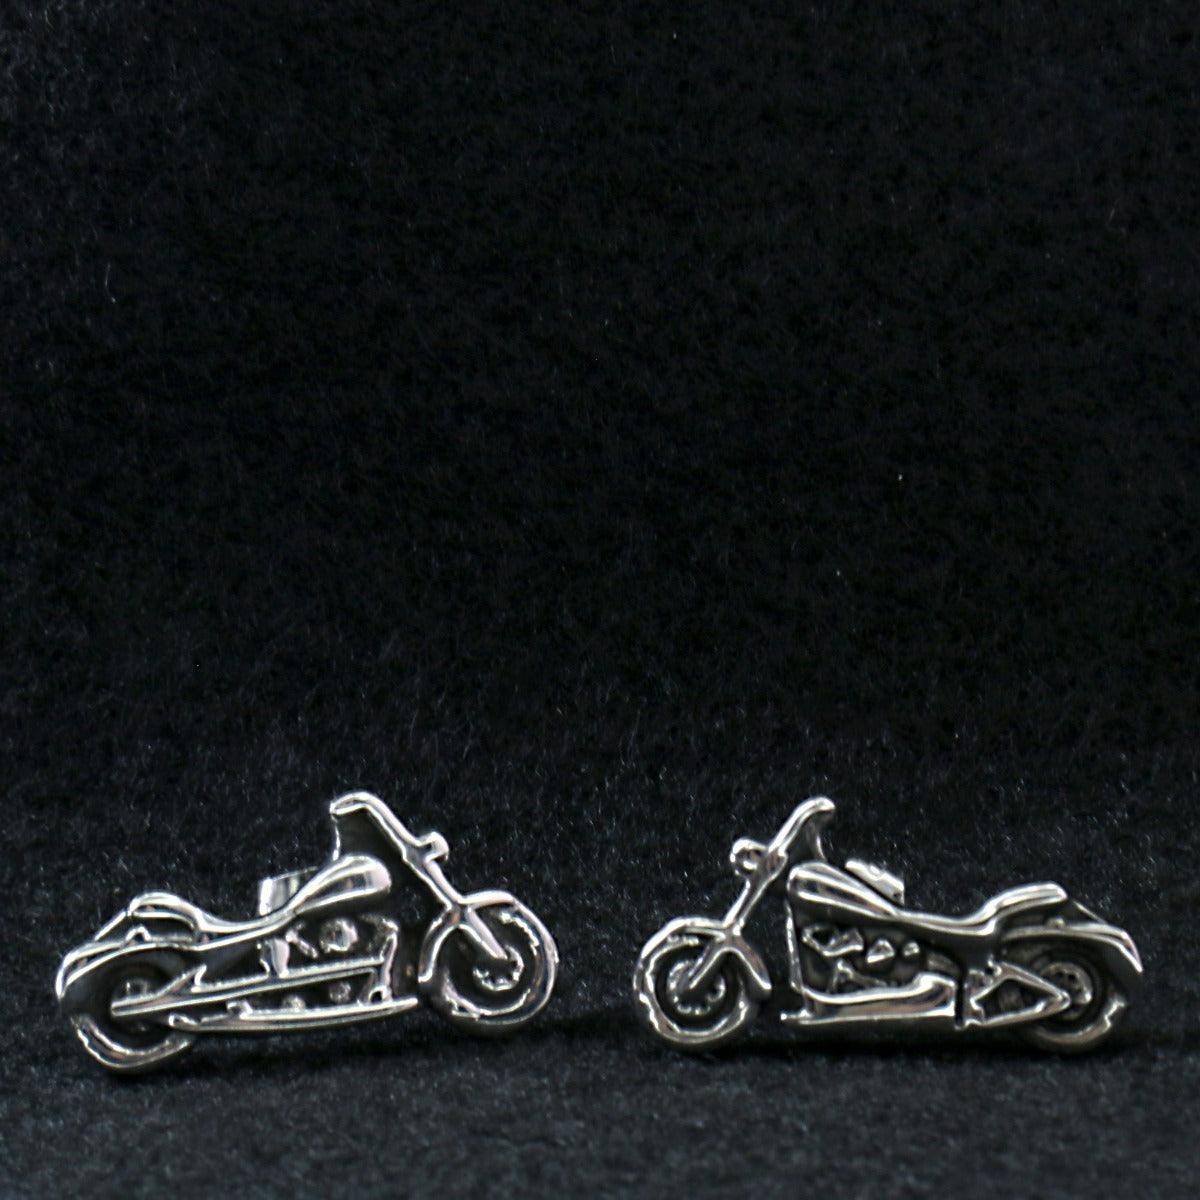 Hot Leathers Motorcycle Post Earrings - American Legend Rider